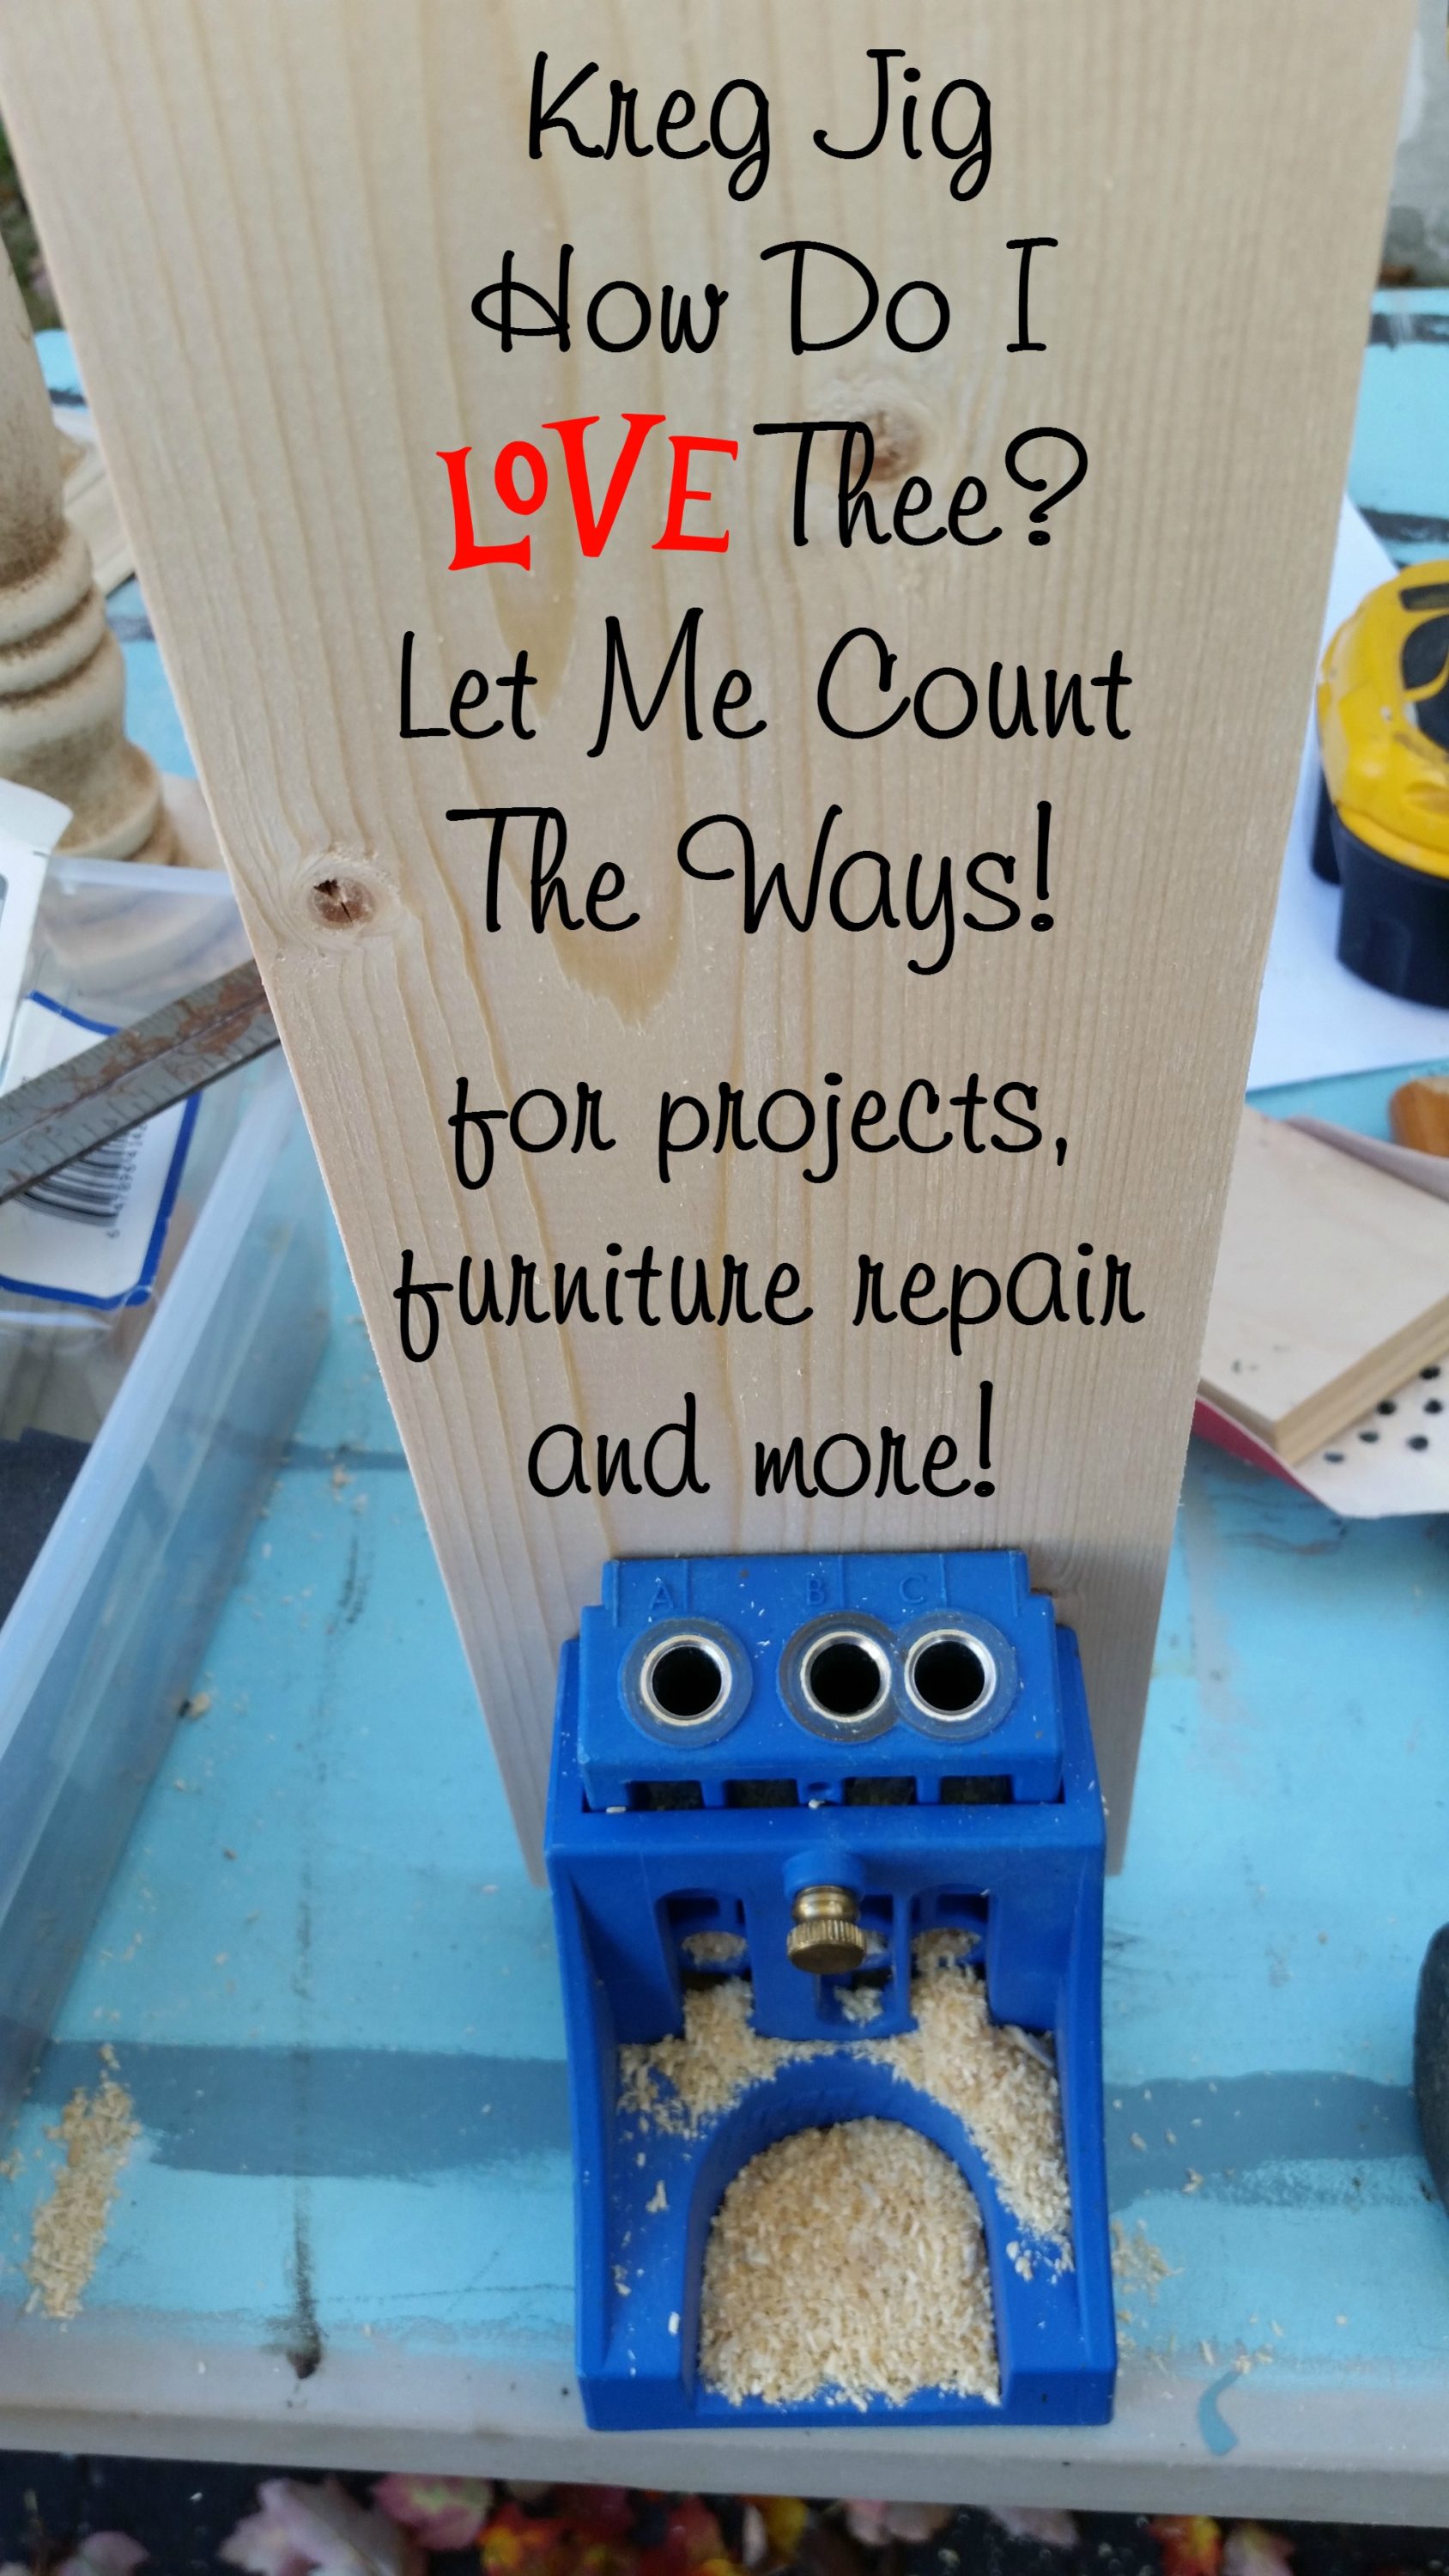 Did you know you can use your Kreg Jig for making repairs on furniture as well as building new furniture projects? I'll show you how! #MyRepurposedLife #repurposed #furniture #repairs #kregjig #diy via @repurposedlife